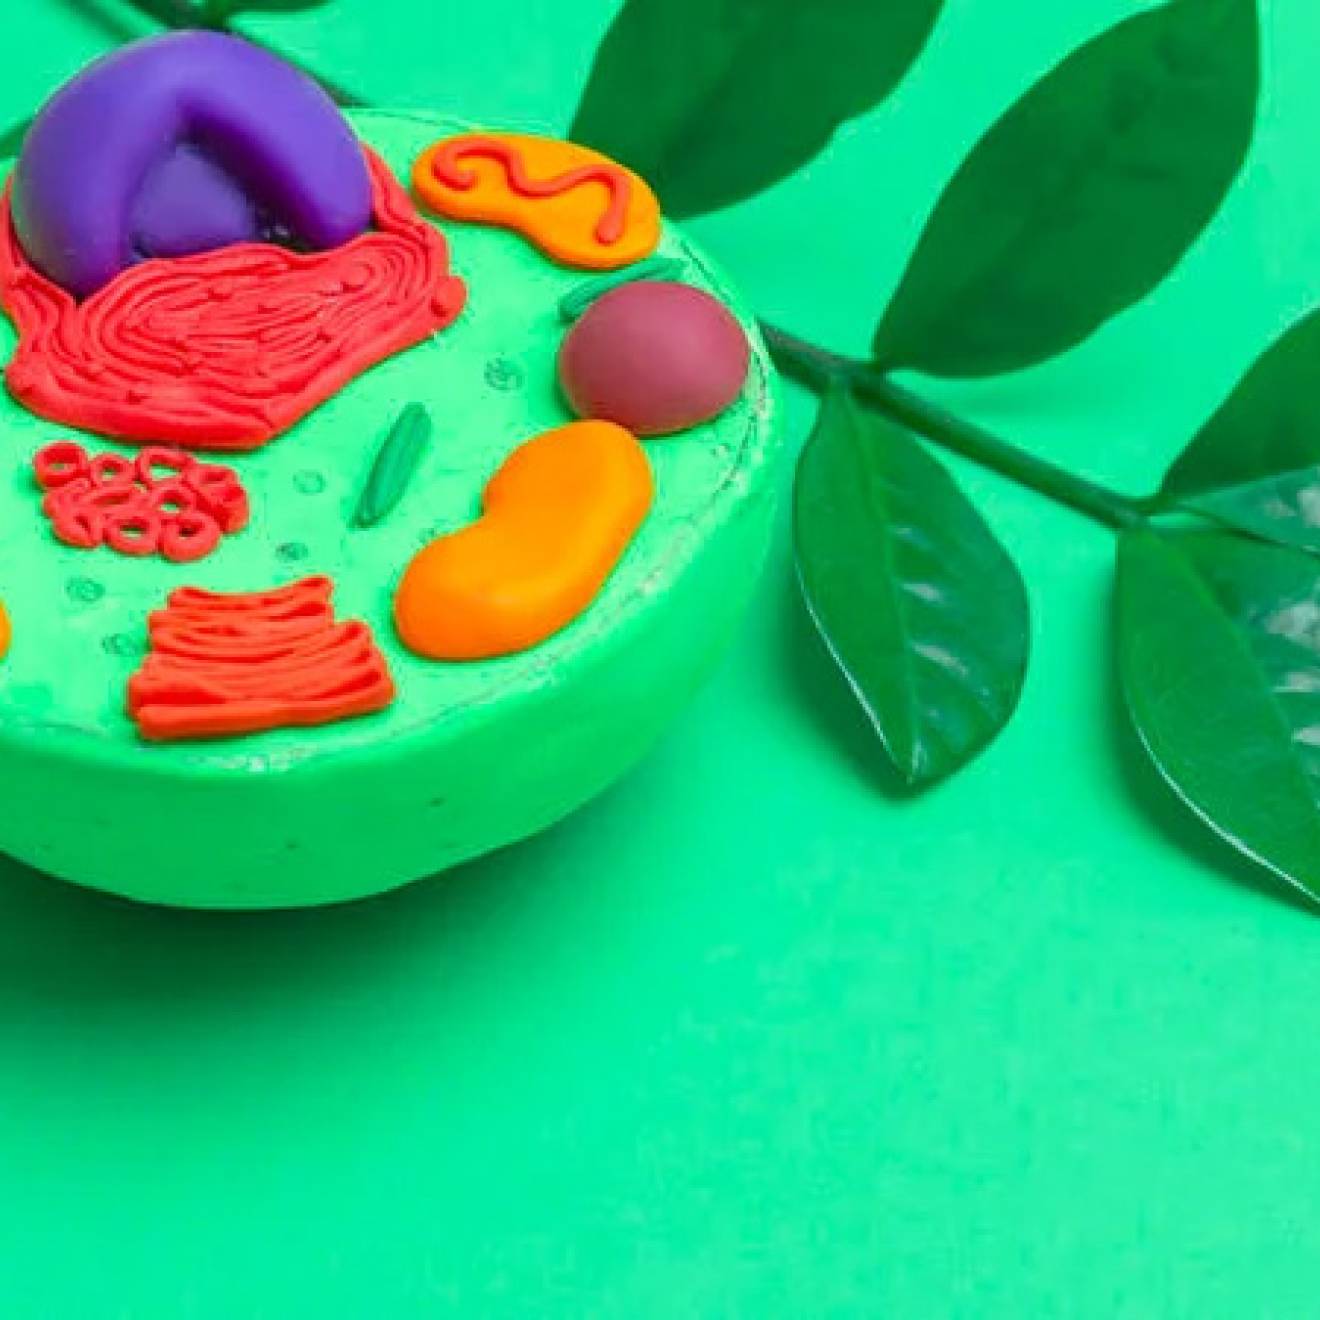 Bright green clay model of a cell showing organelles in contrasting colors, on a bright green background, with a sprig of leaves 